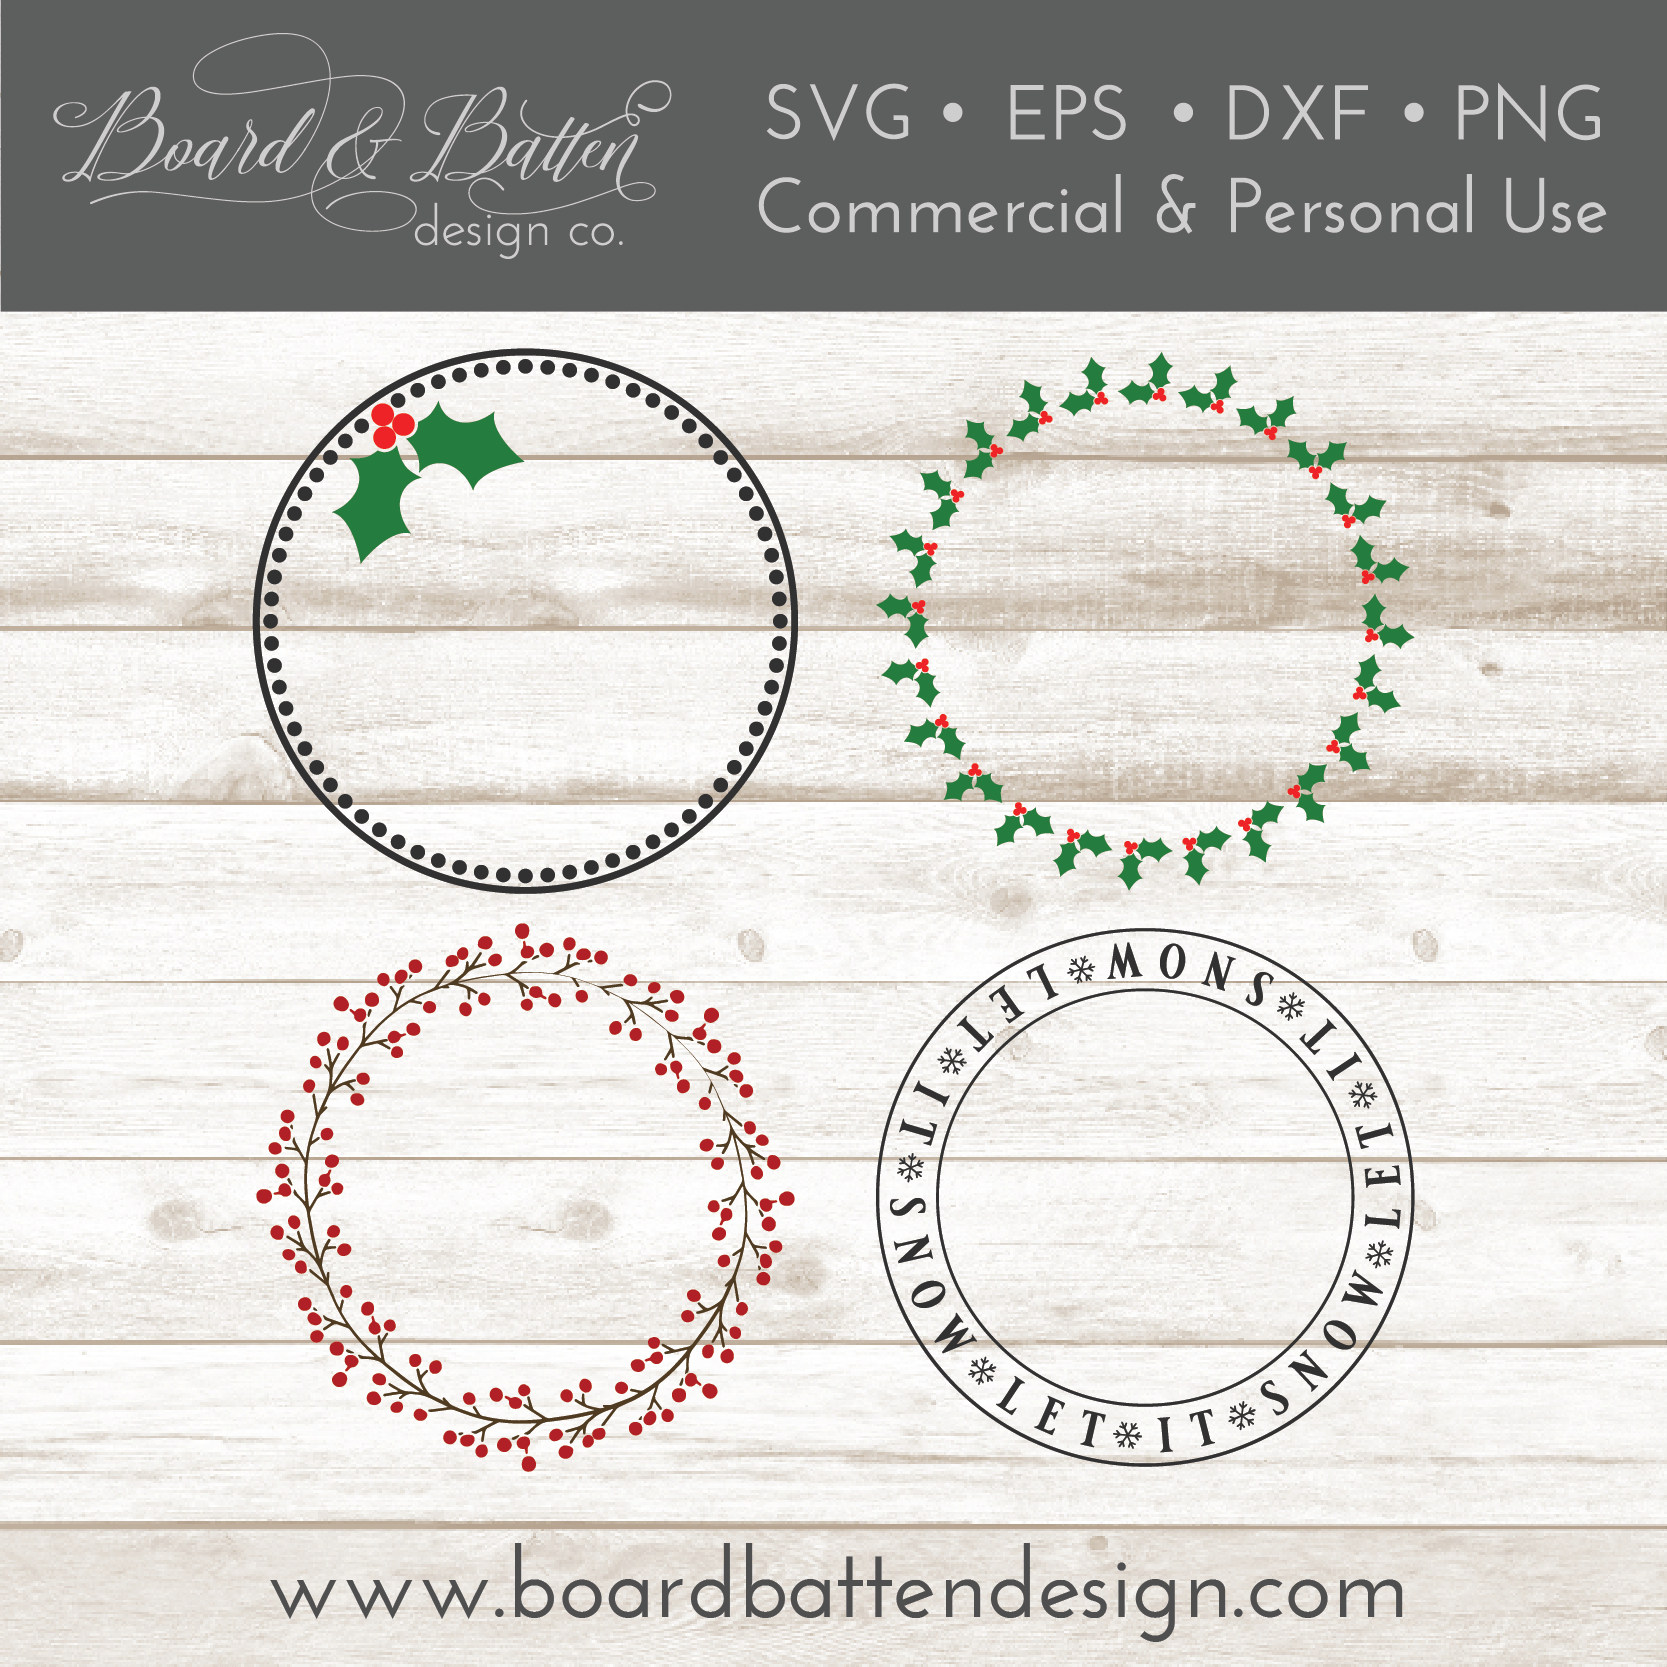 Set of 4 Holiday Themed SVG File Circle Frames - Commercial Use SVG Files for Cricut & Silhouette